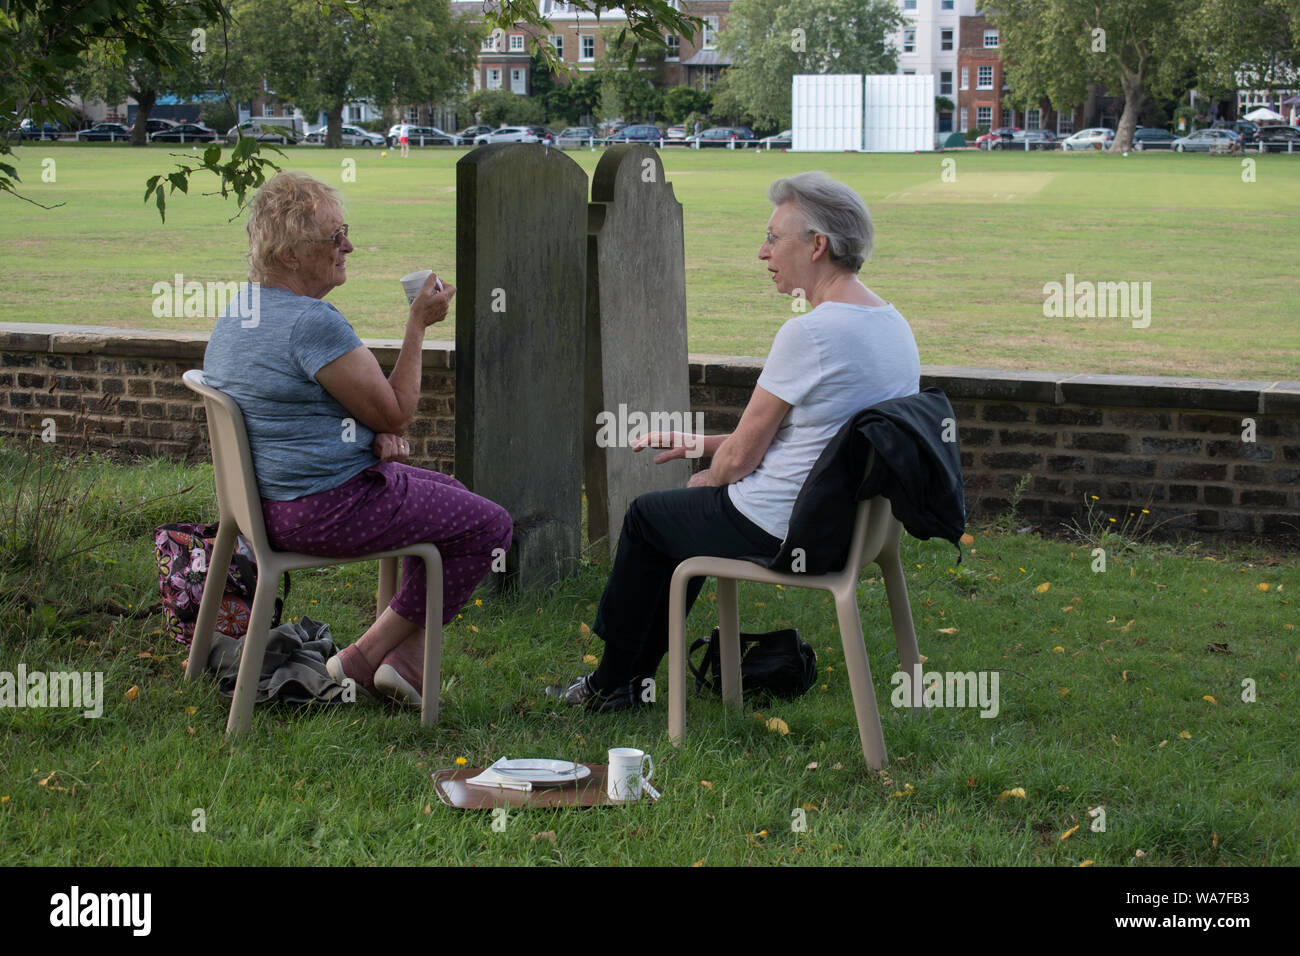 Afternoon tea UK  People two women friends catching up, chatting over a cup of English tea sitting in a church graveyard London 2010s HOMER SYKES Stock Photo